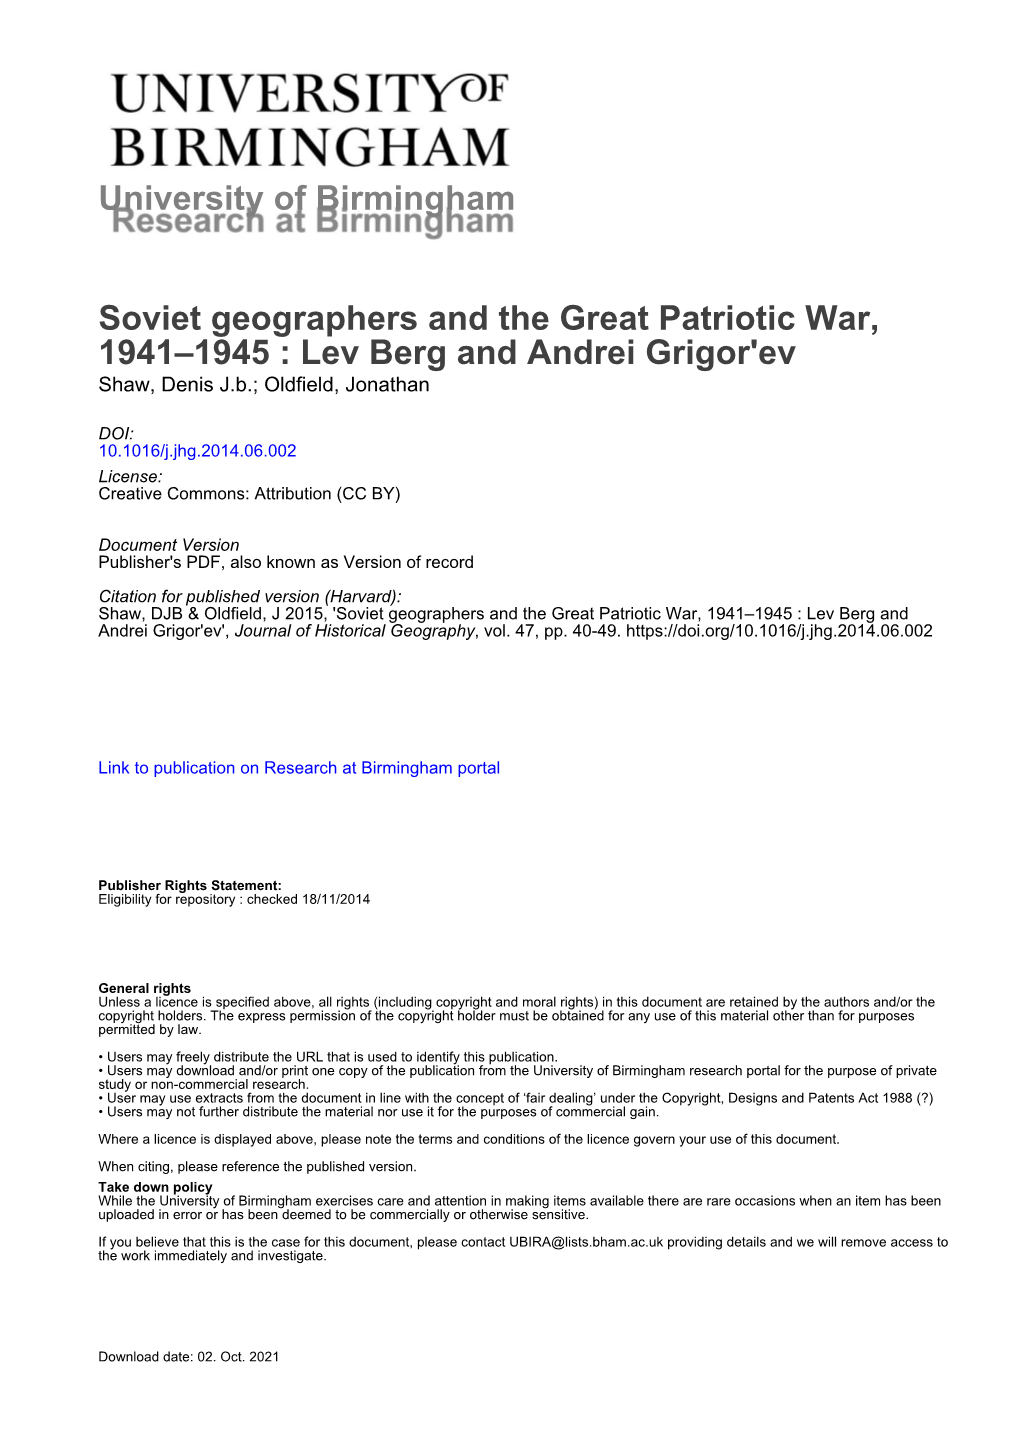 Soviet Geographers and the Great Patriotic War, 1941-1945